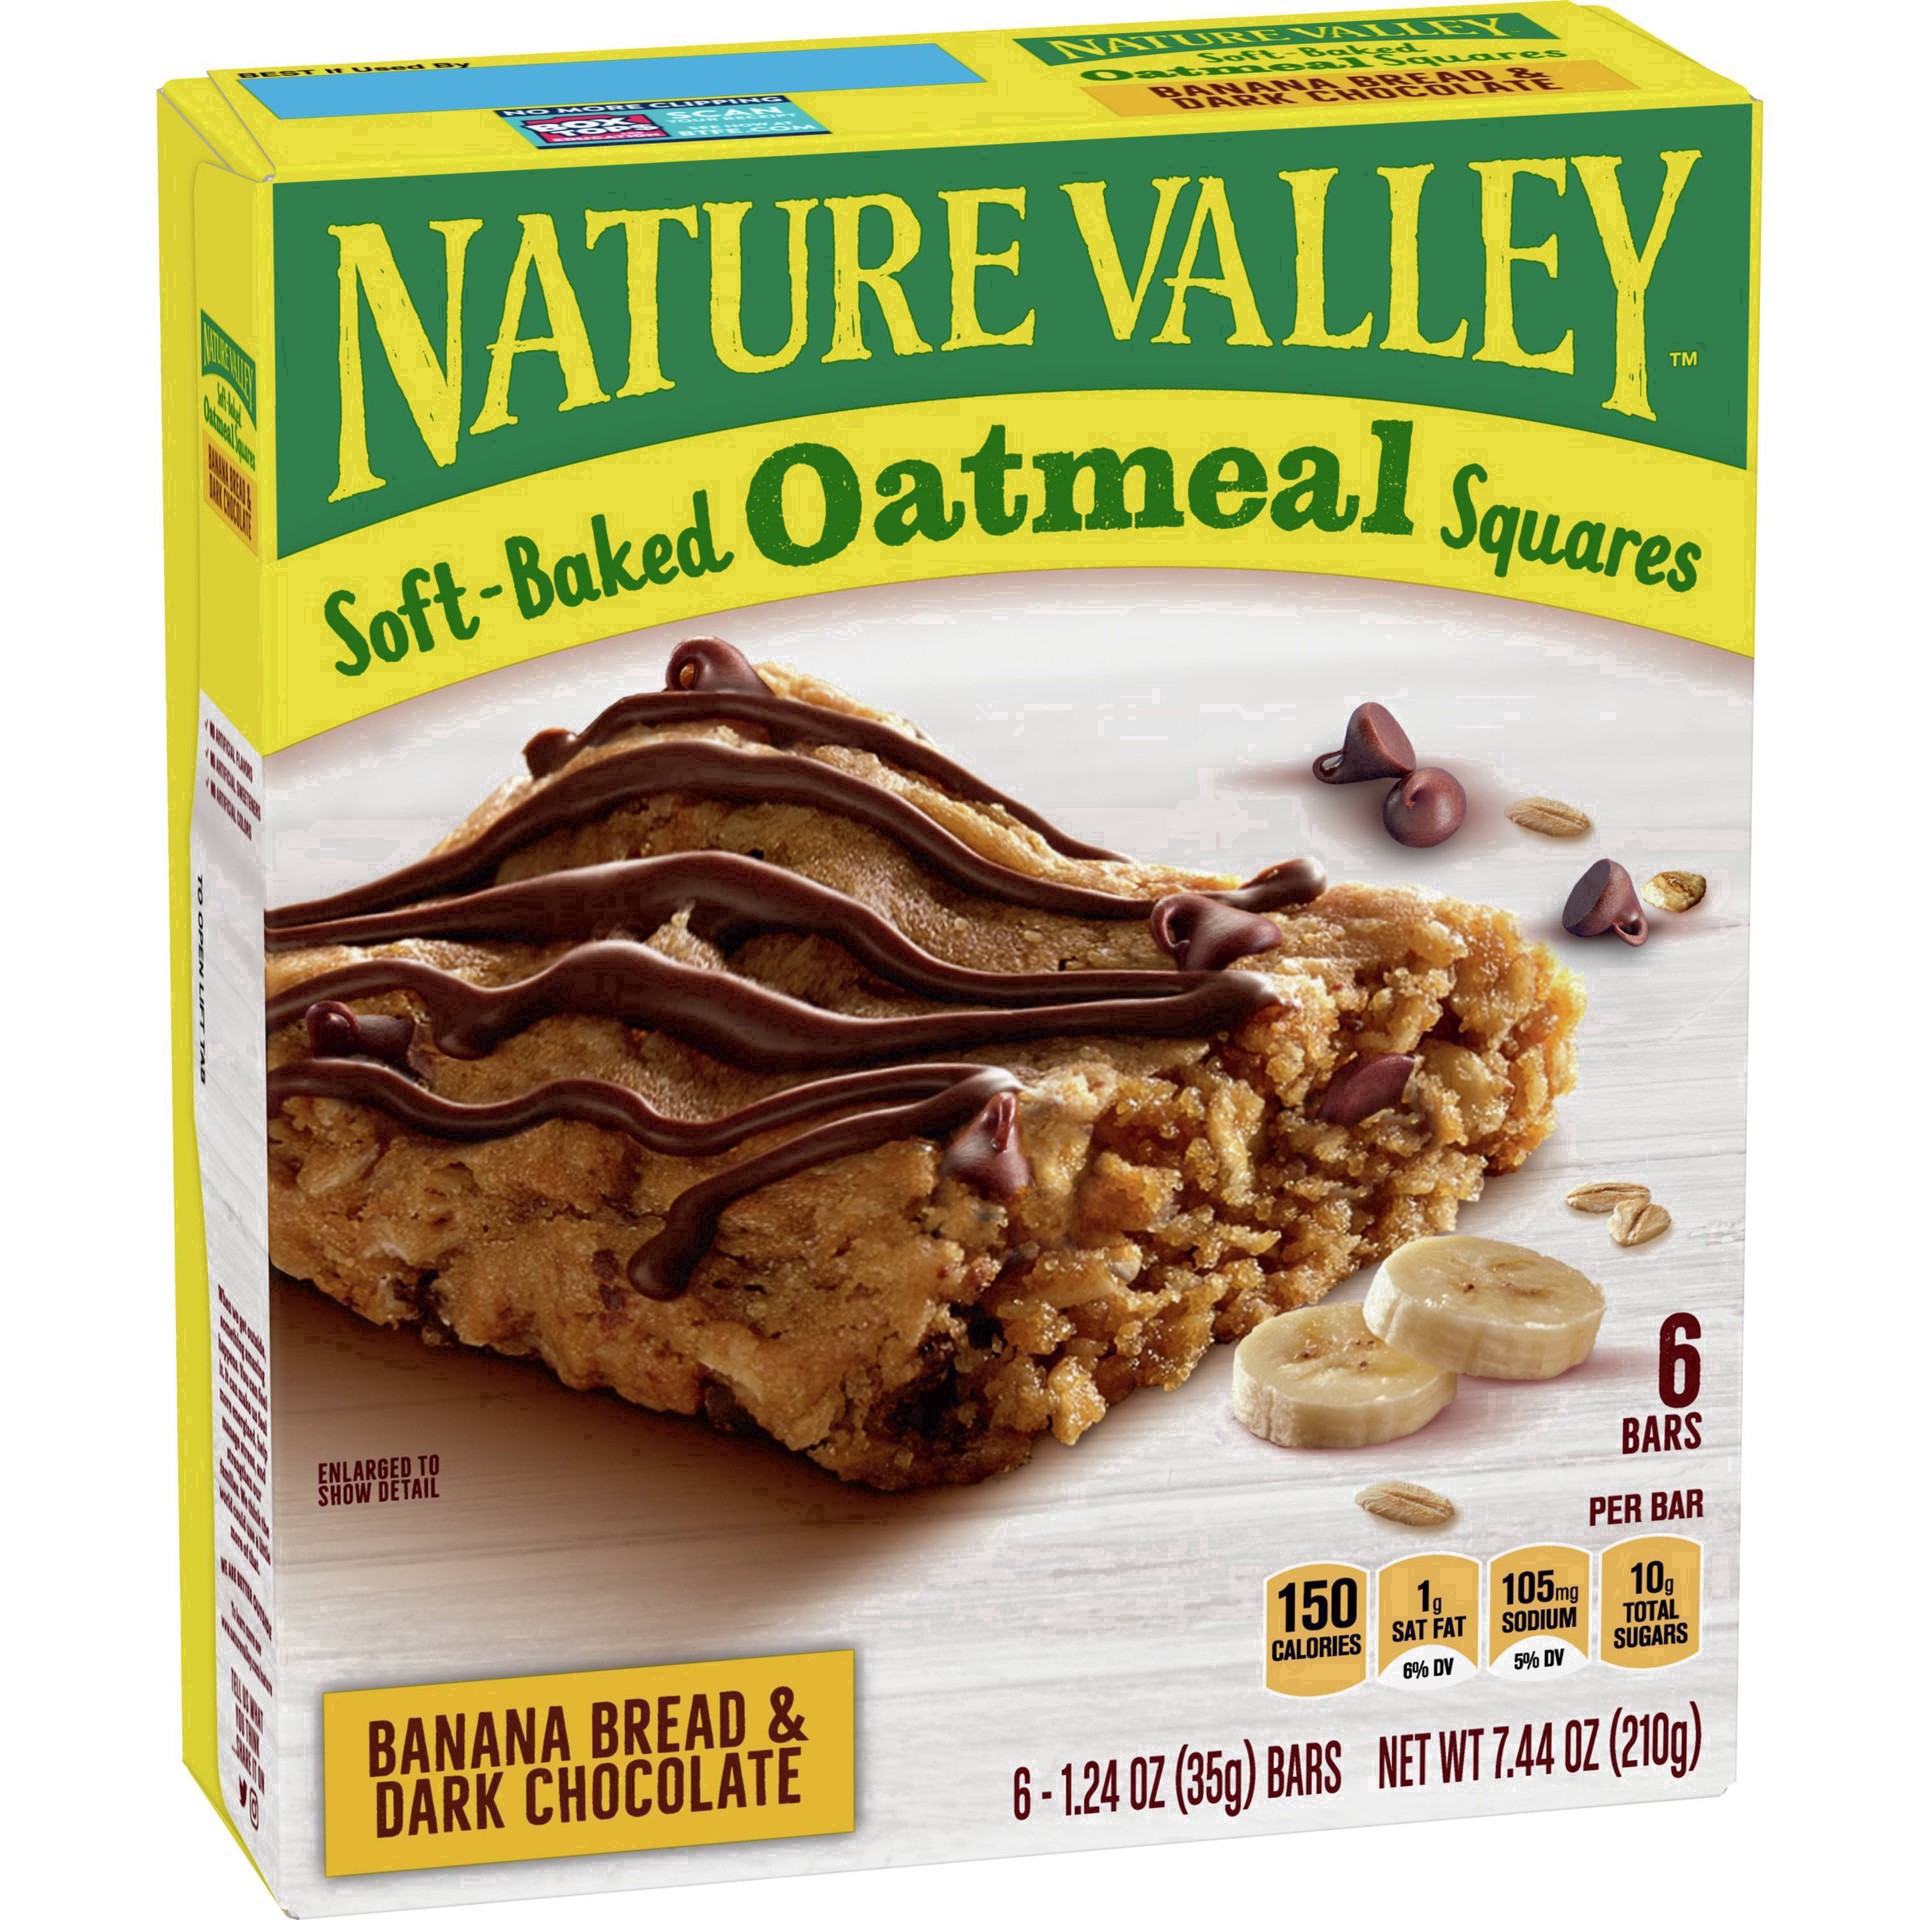 slide 13 of 101, Nature Valley Soft-Baked Oatmeal Squares, Banana Bread & Dark Chocolate, 6 ct, 6 ct